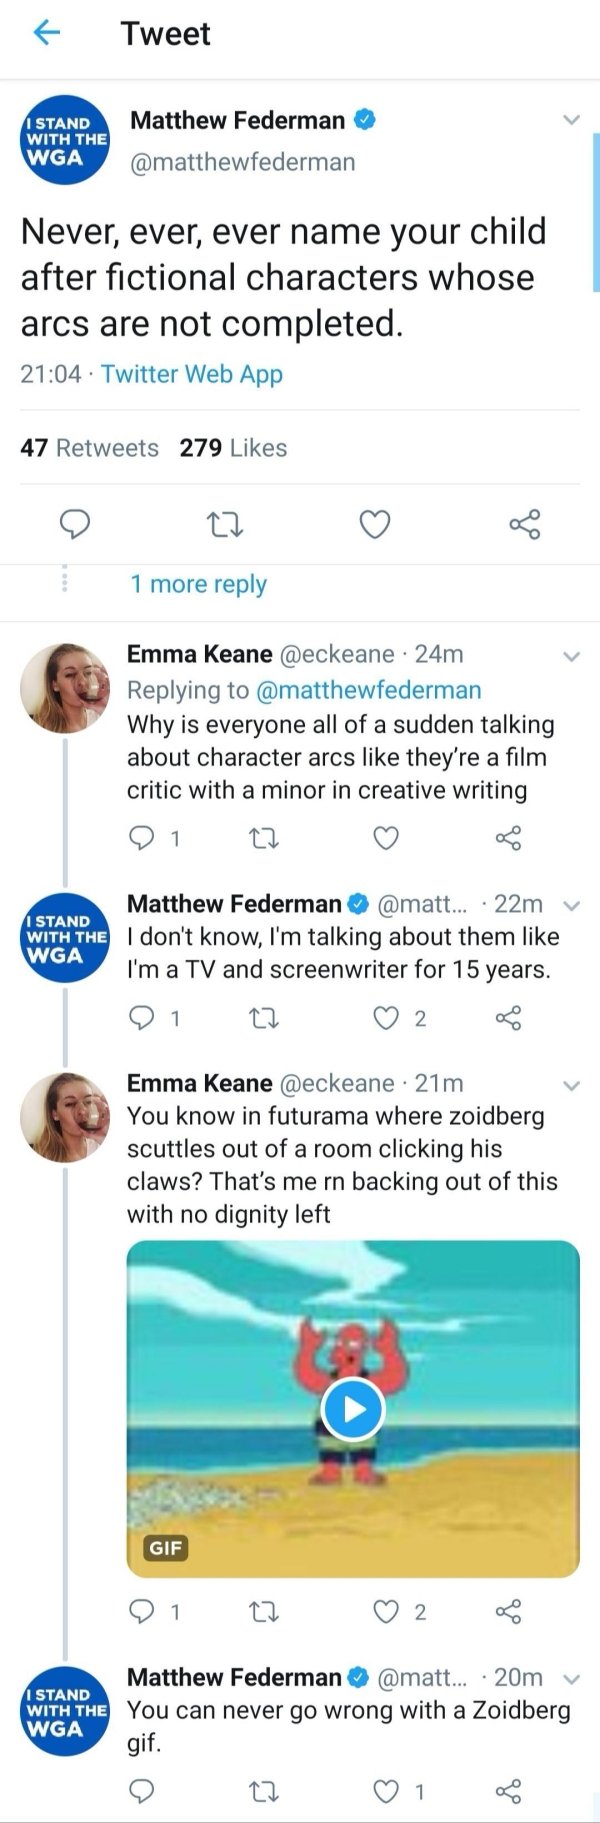 r dontyouknowwhoiam - Tweet I Stand With The Wga Matthew Federman Never, ever, ever name your child after fictional characters whose arcs are not completed. Twitter Web App 47 279 1 more Emma Keane 24m Why is everyone all of a sudden talking about charact